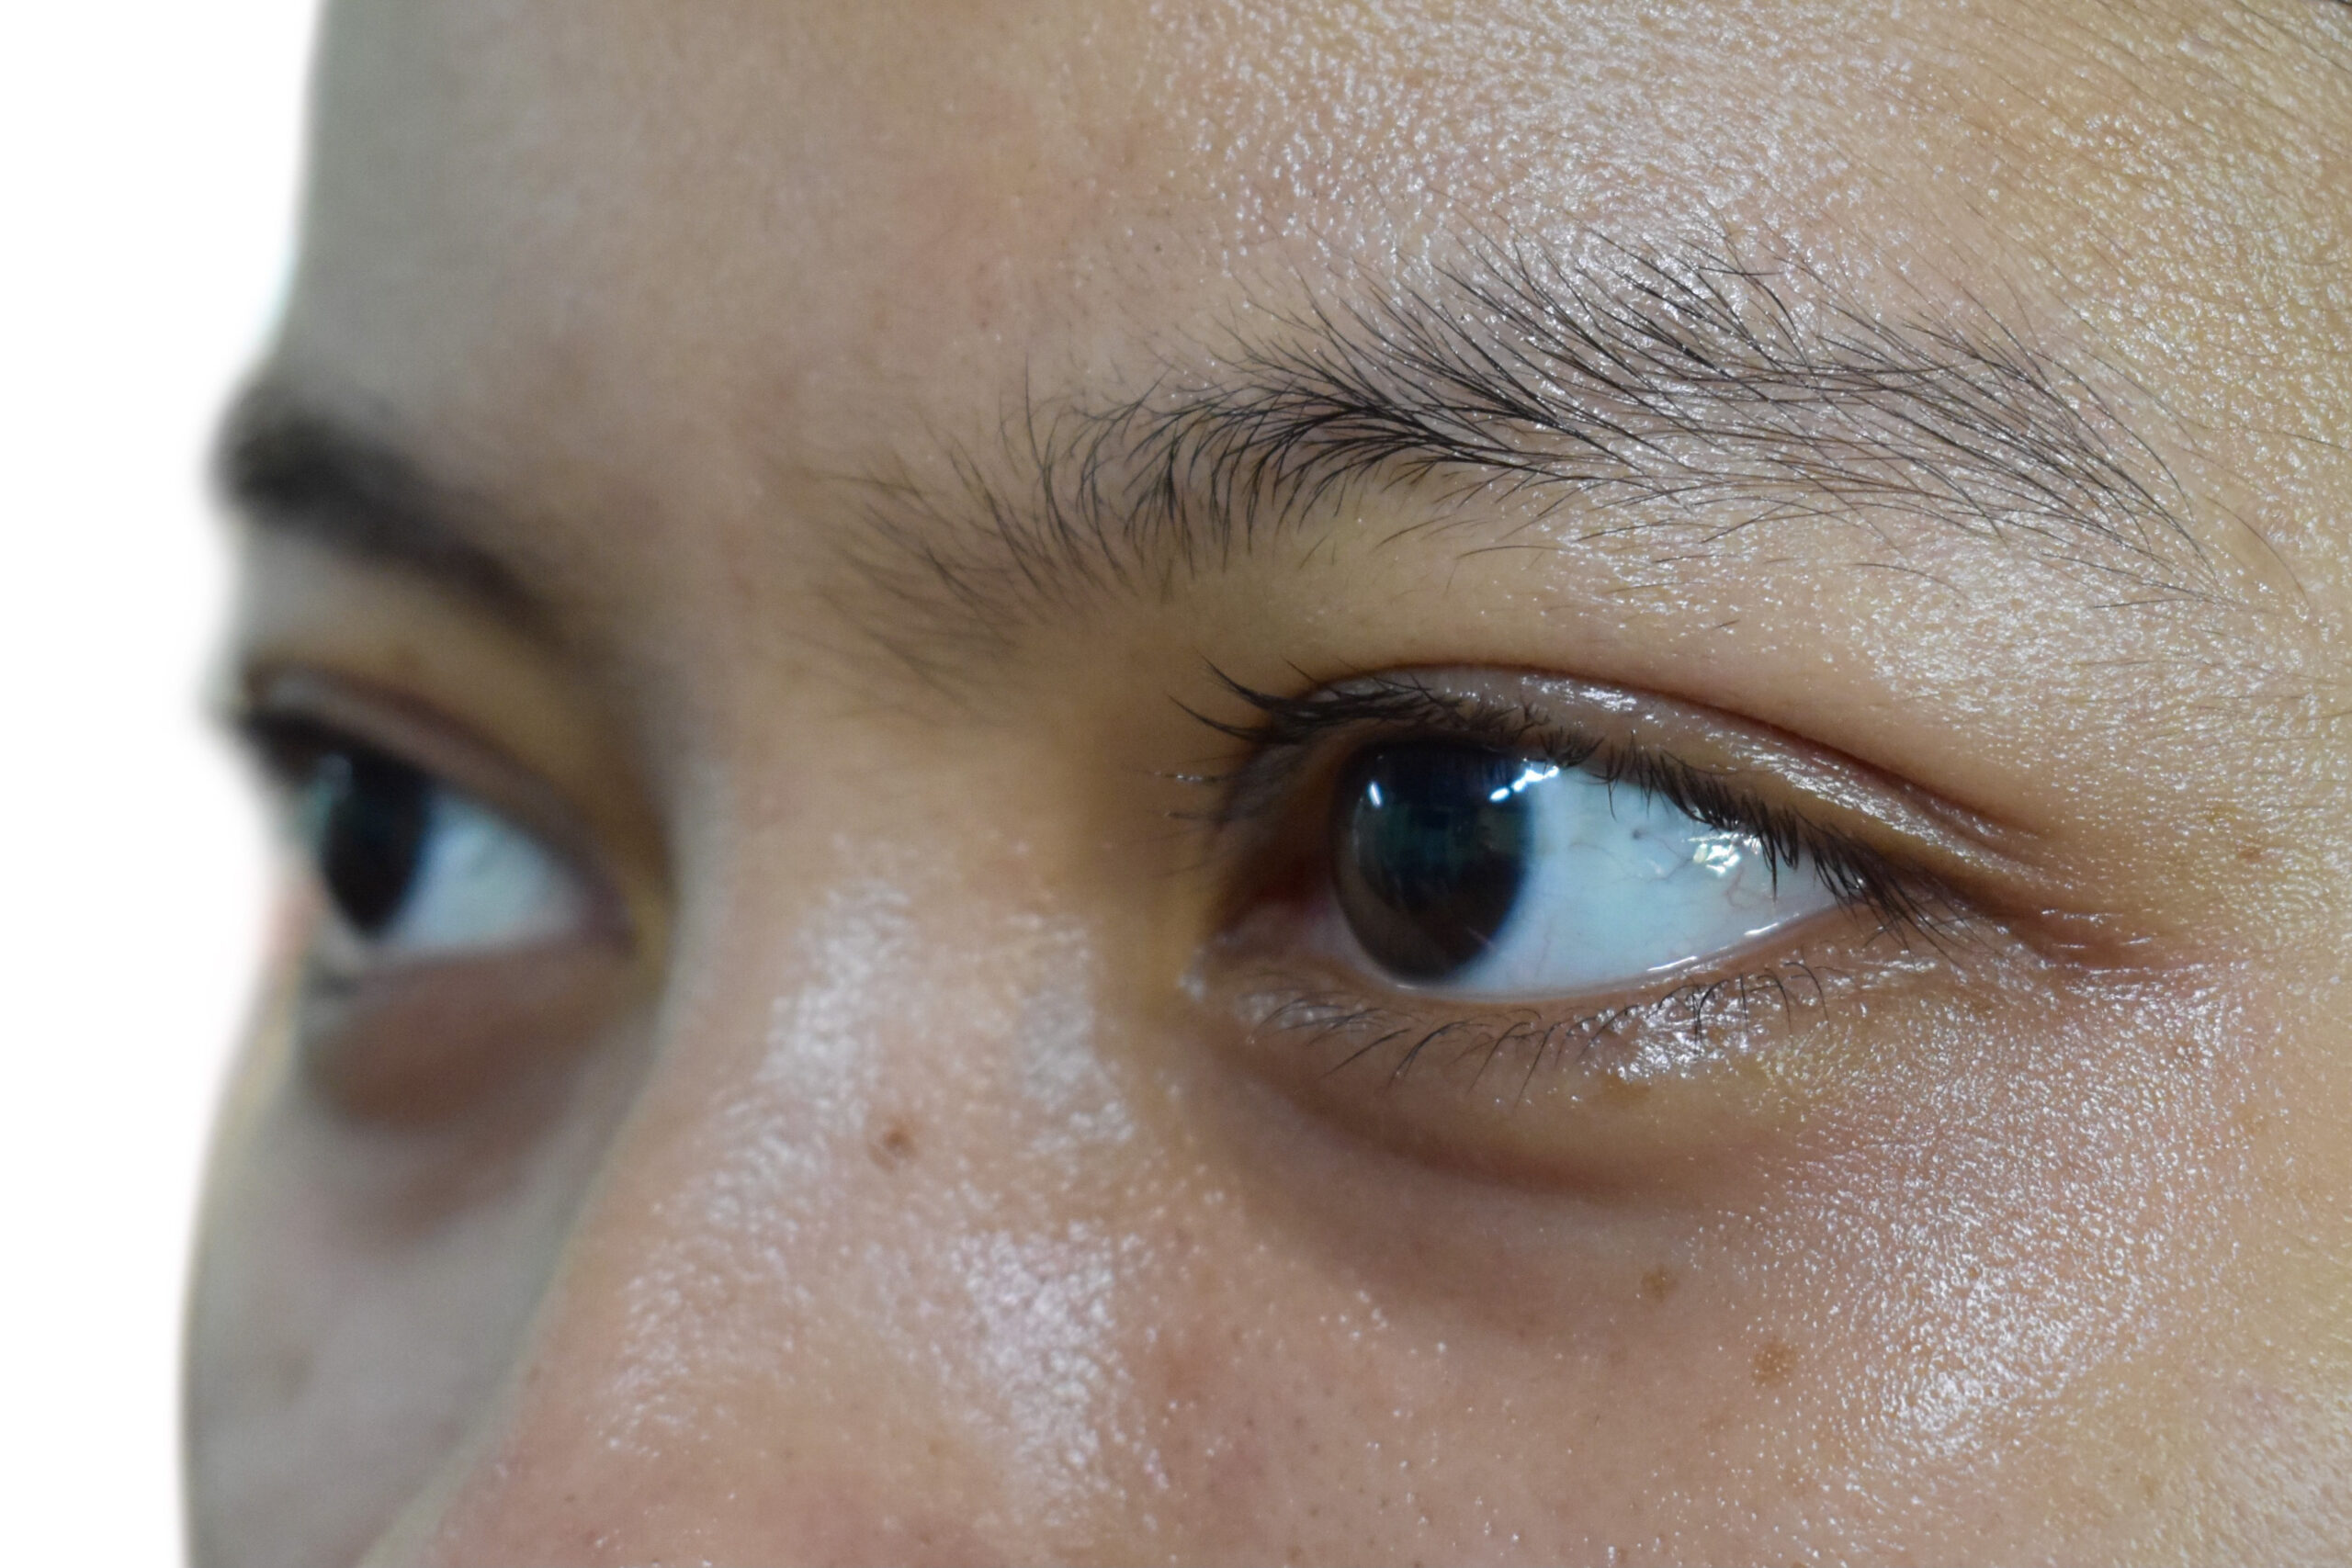 Dark circles around eyes of Asian woman. Brown discoloration of eyelids.